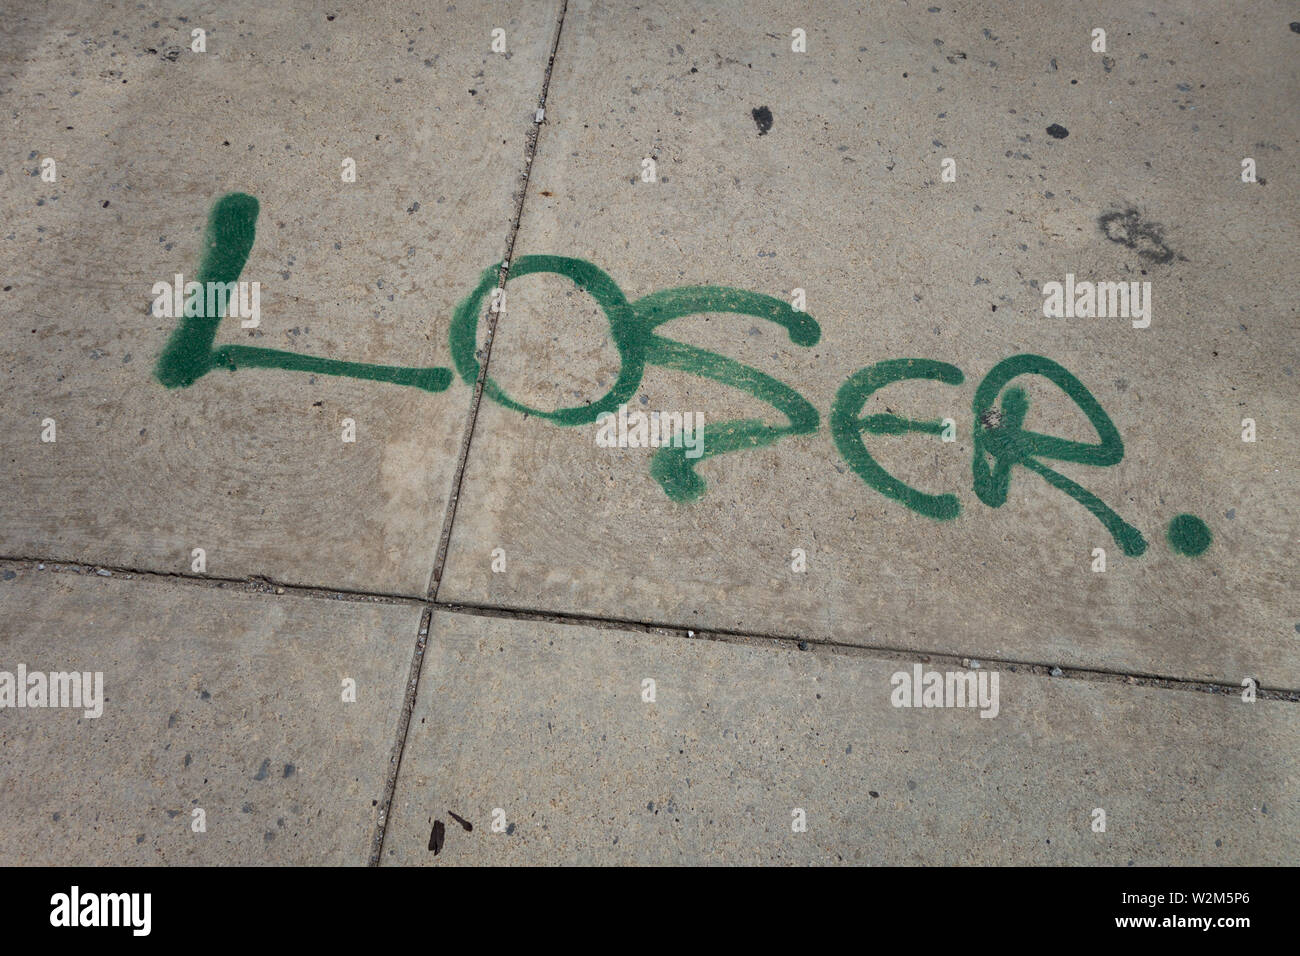 The word 'loser' spray painted on a sidewalk in green paint Stock Photo